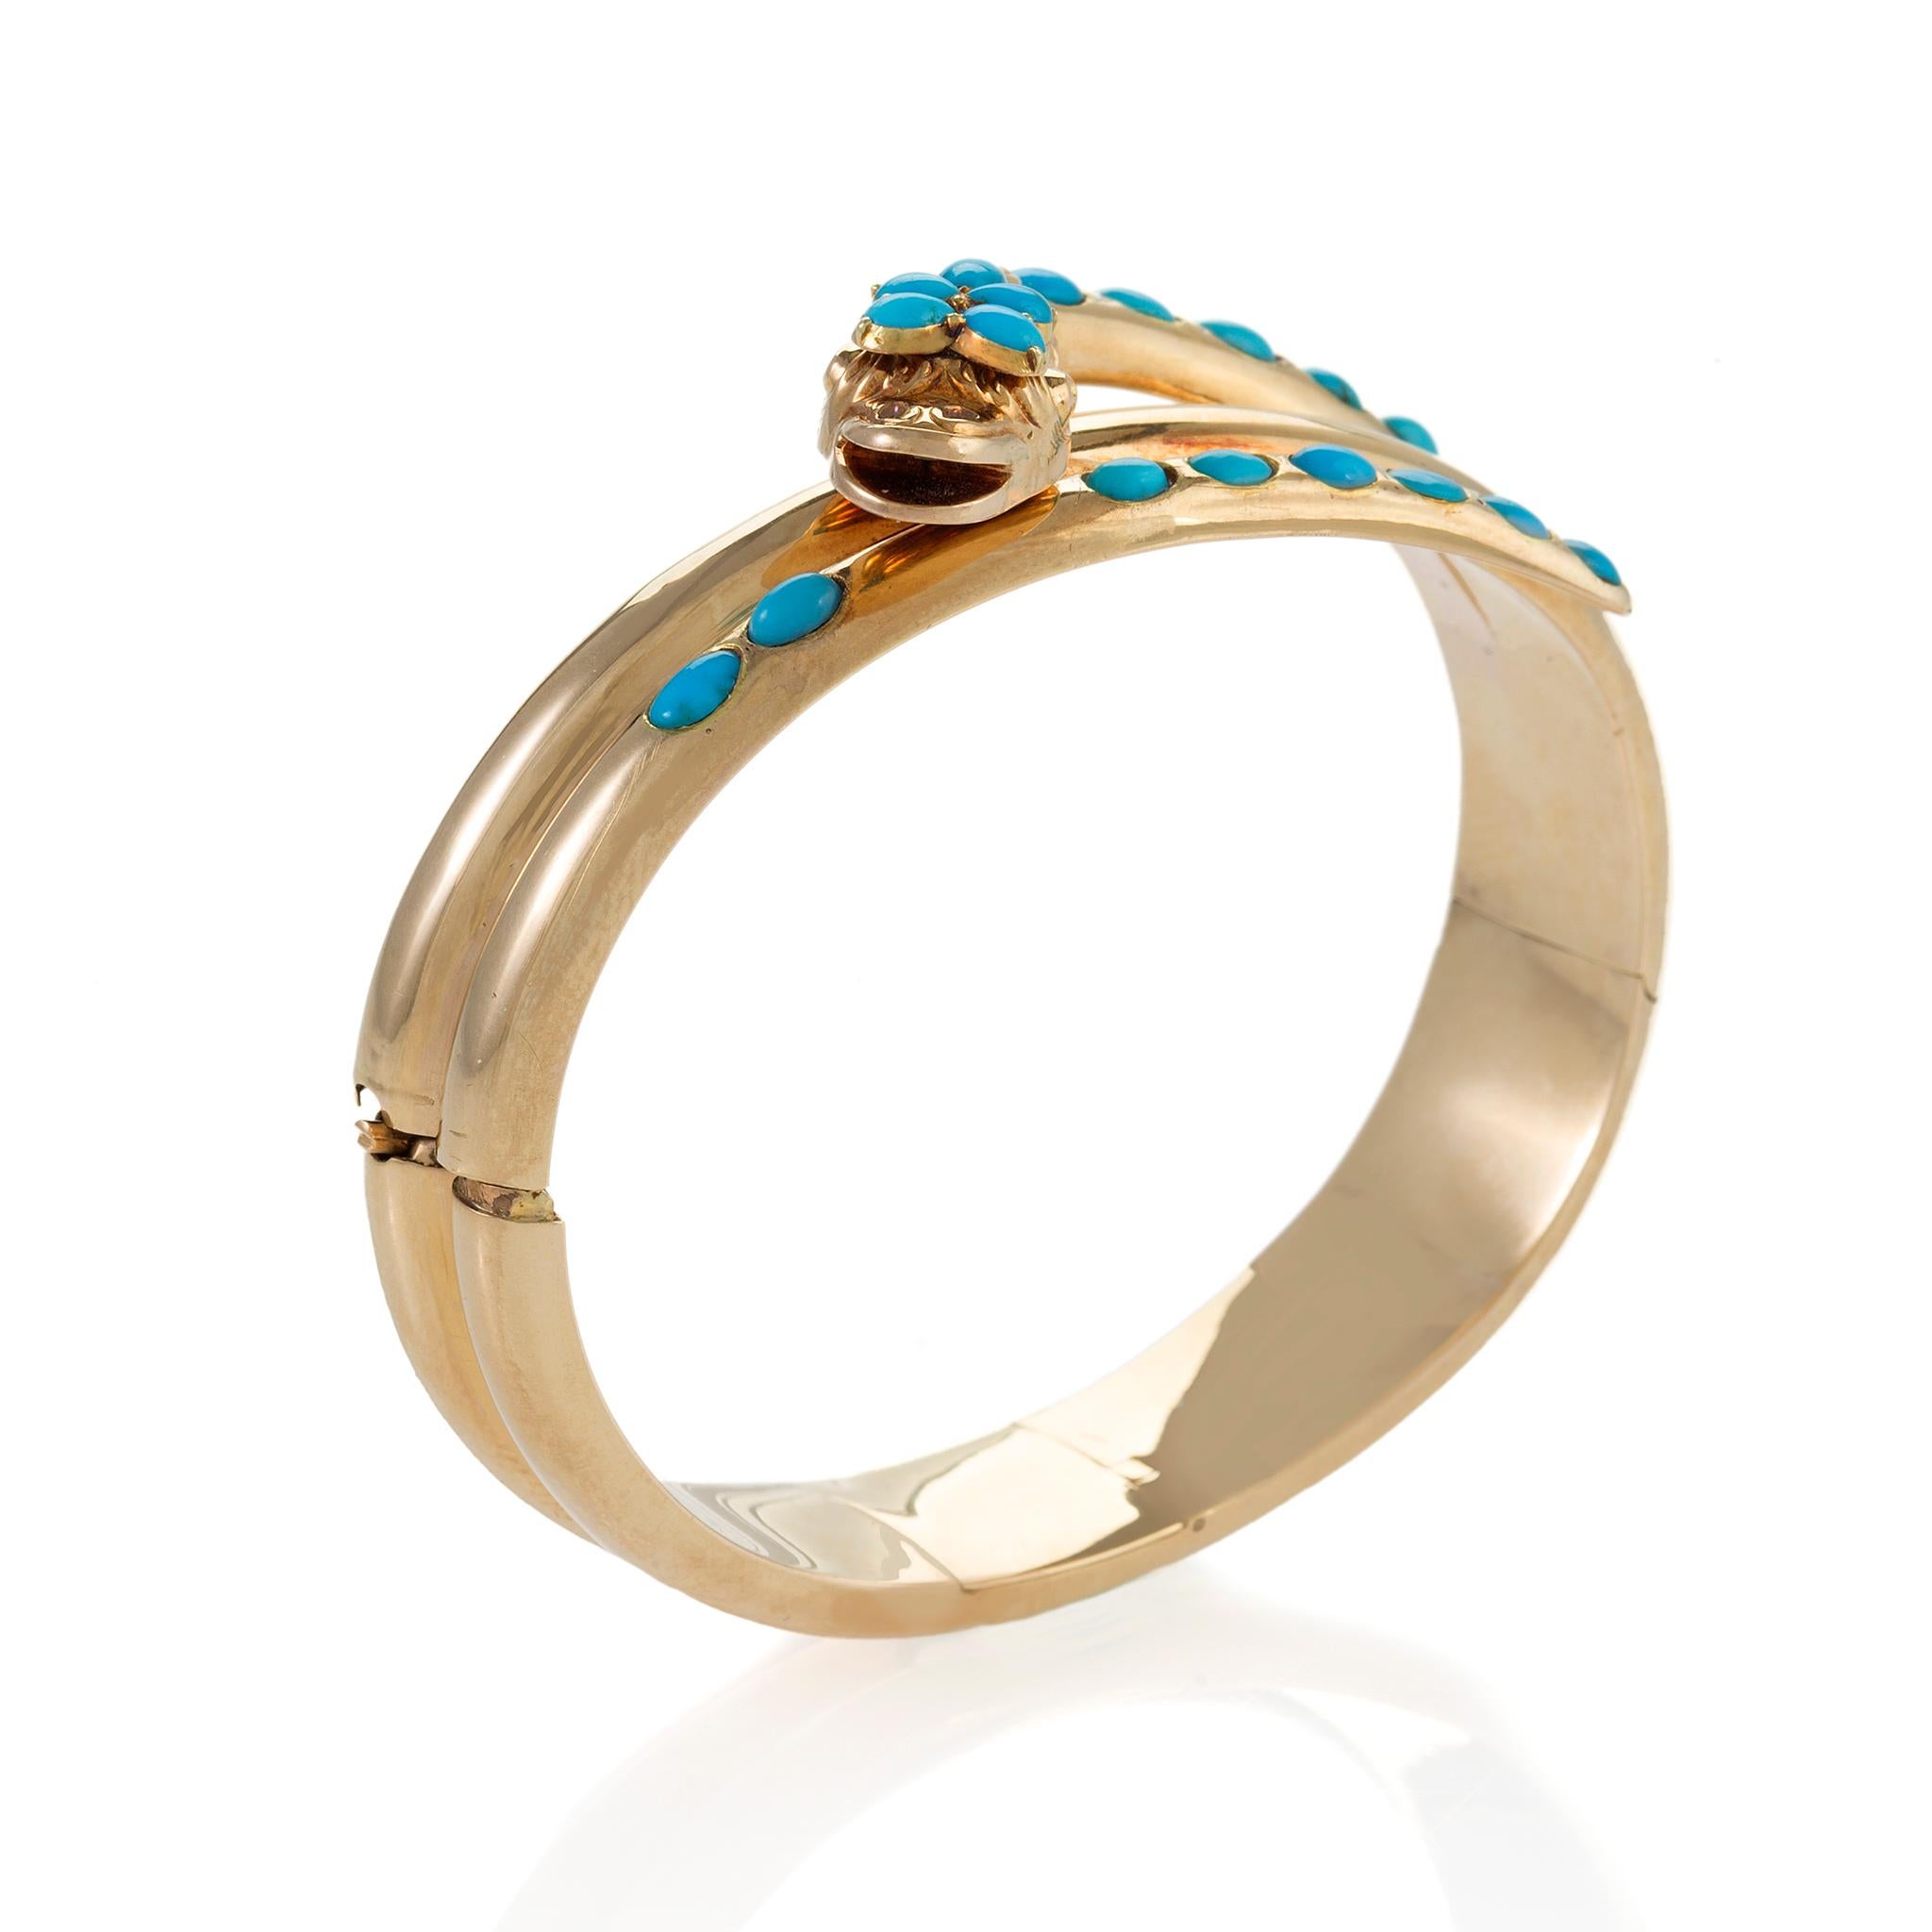 This Victorian serpent bangle bracelet is composed of gold and turquoise. Designed as a triple coiled snake and floral motif, the head and frontal coils are highlighted by oval and pear-shaped turquoise cabochons. With its multiple polished coils